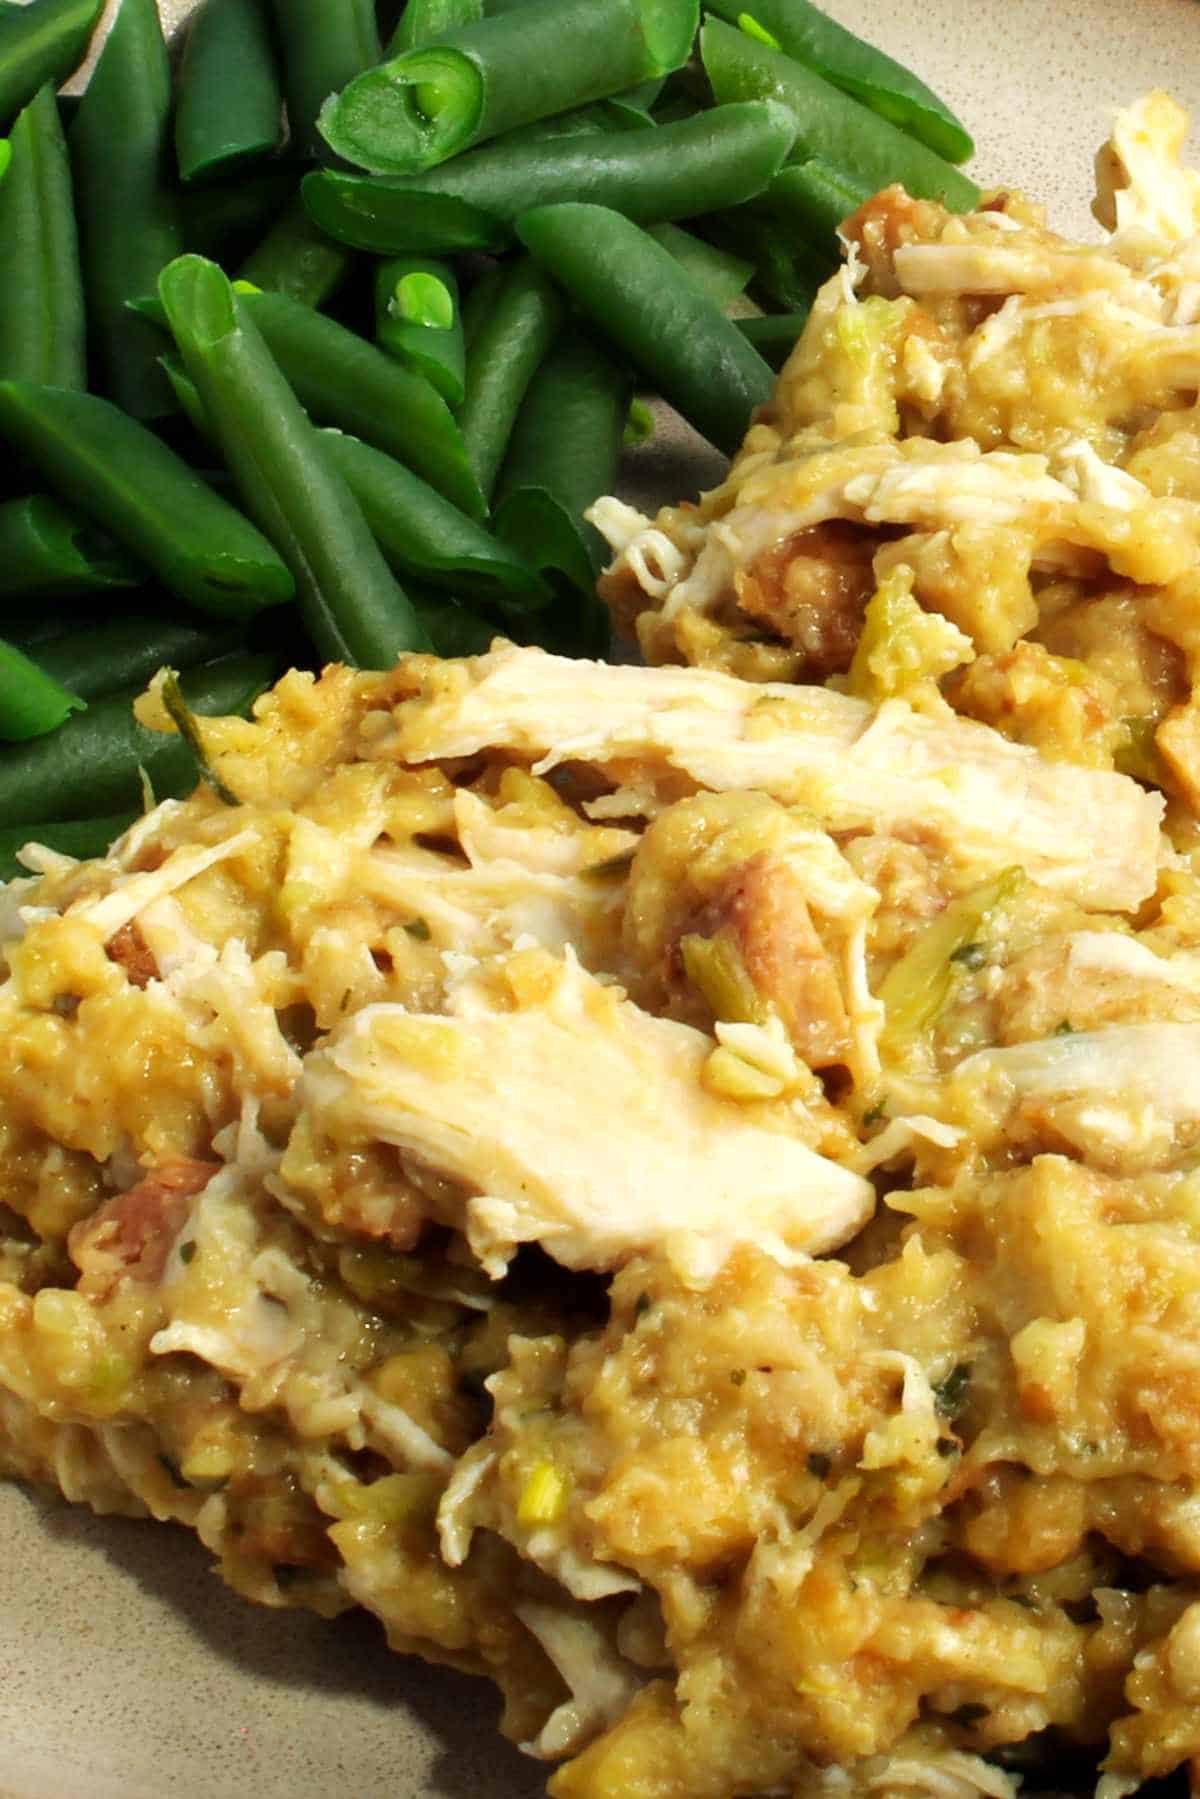 4 ingredient slow cooker chicken with stuffing on a plate with green beans.